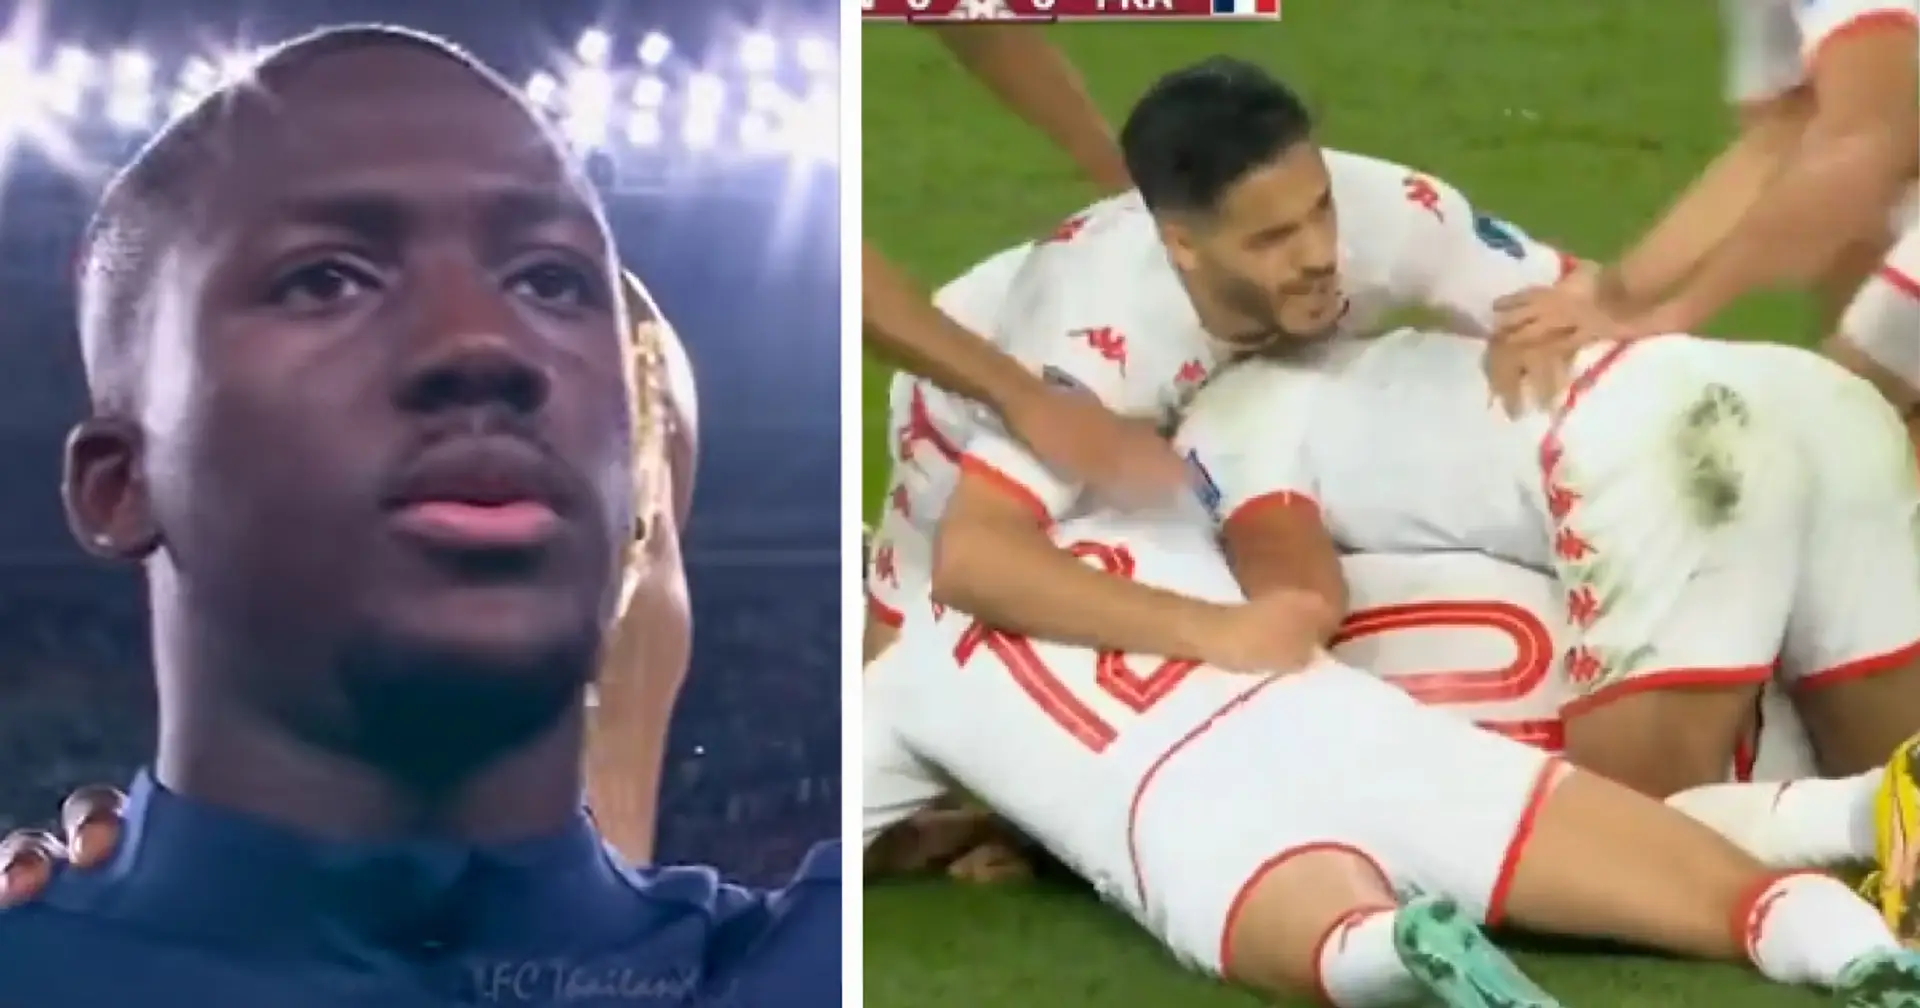 Tunisia beats France at World Cup – how Konate performed in 90 minutes